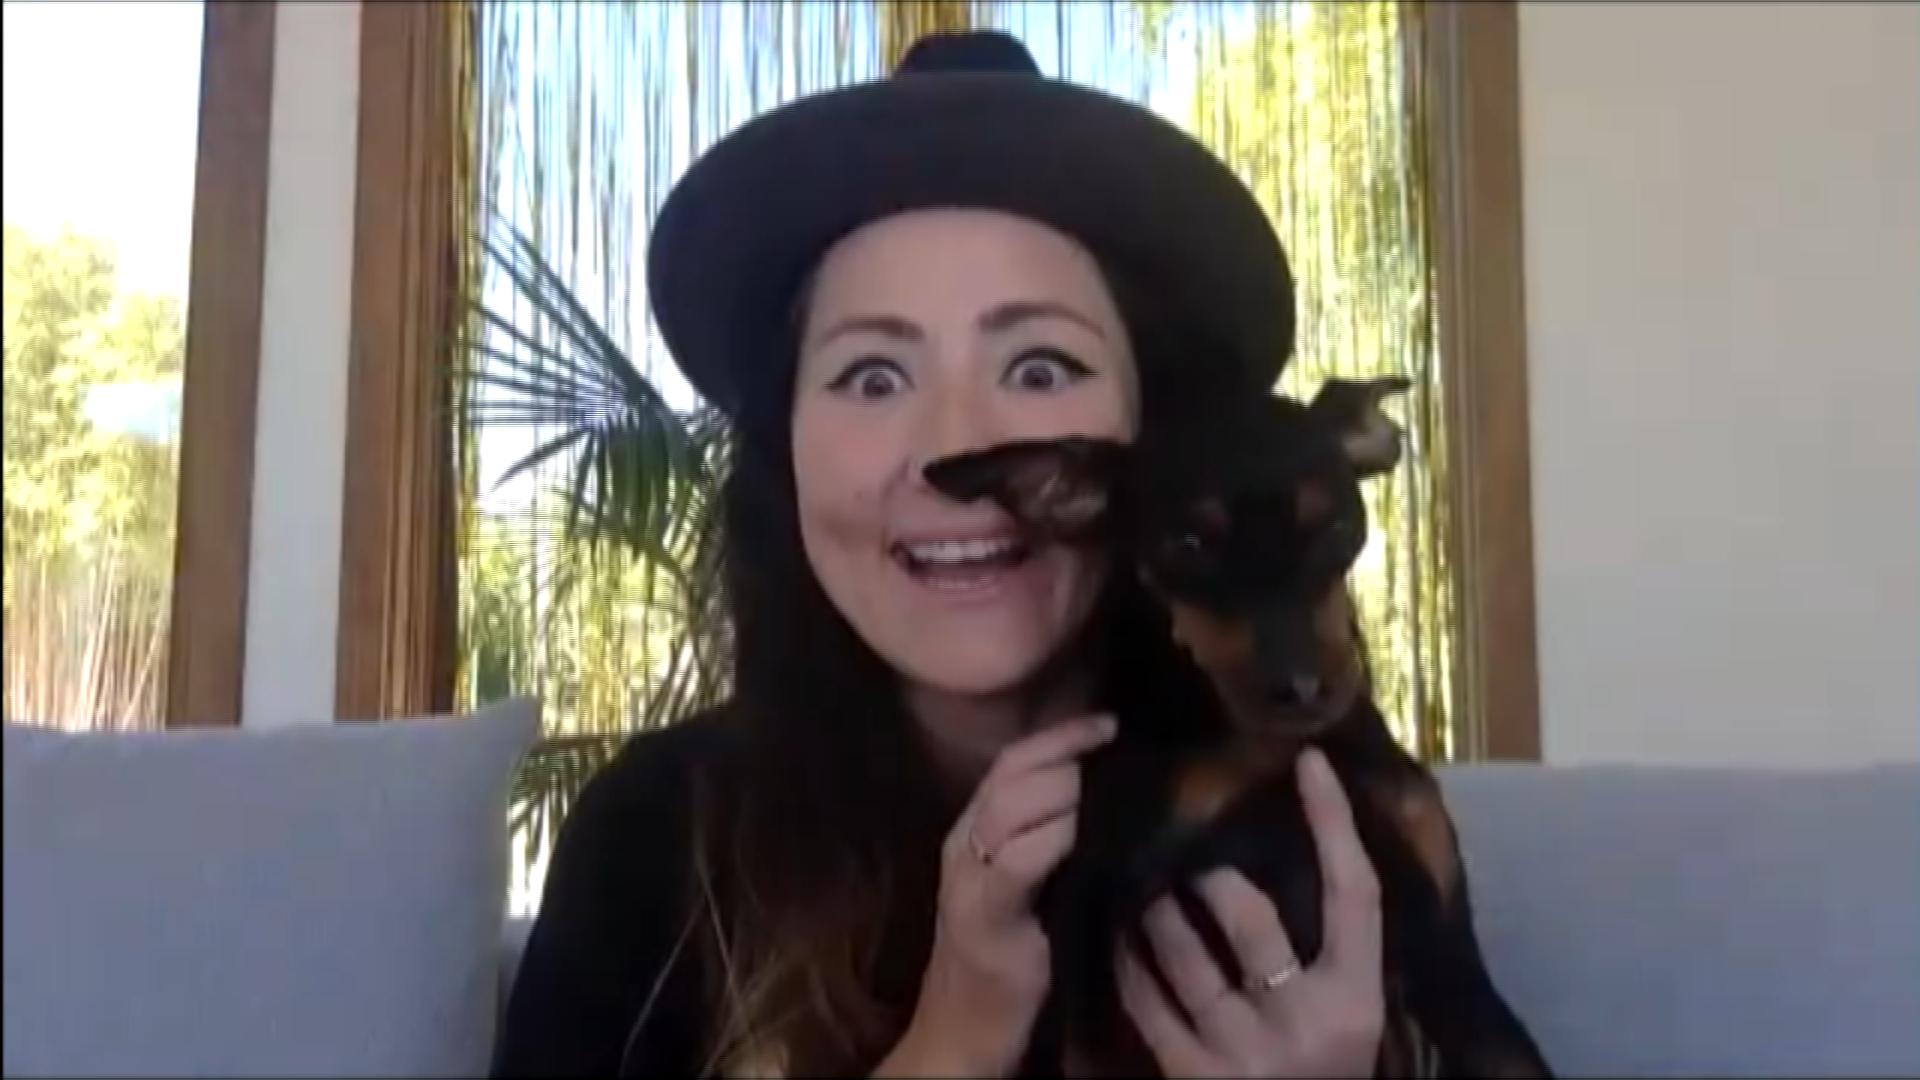 KT Tunstall and her new dog Mini will also perform.